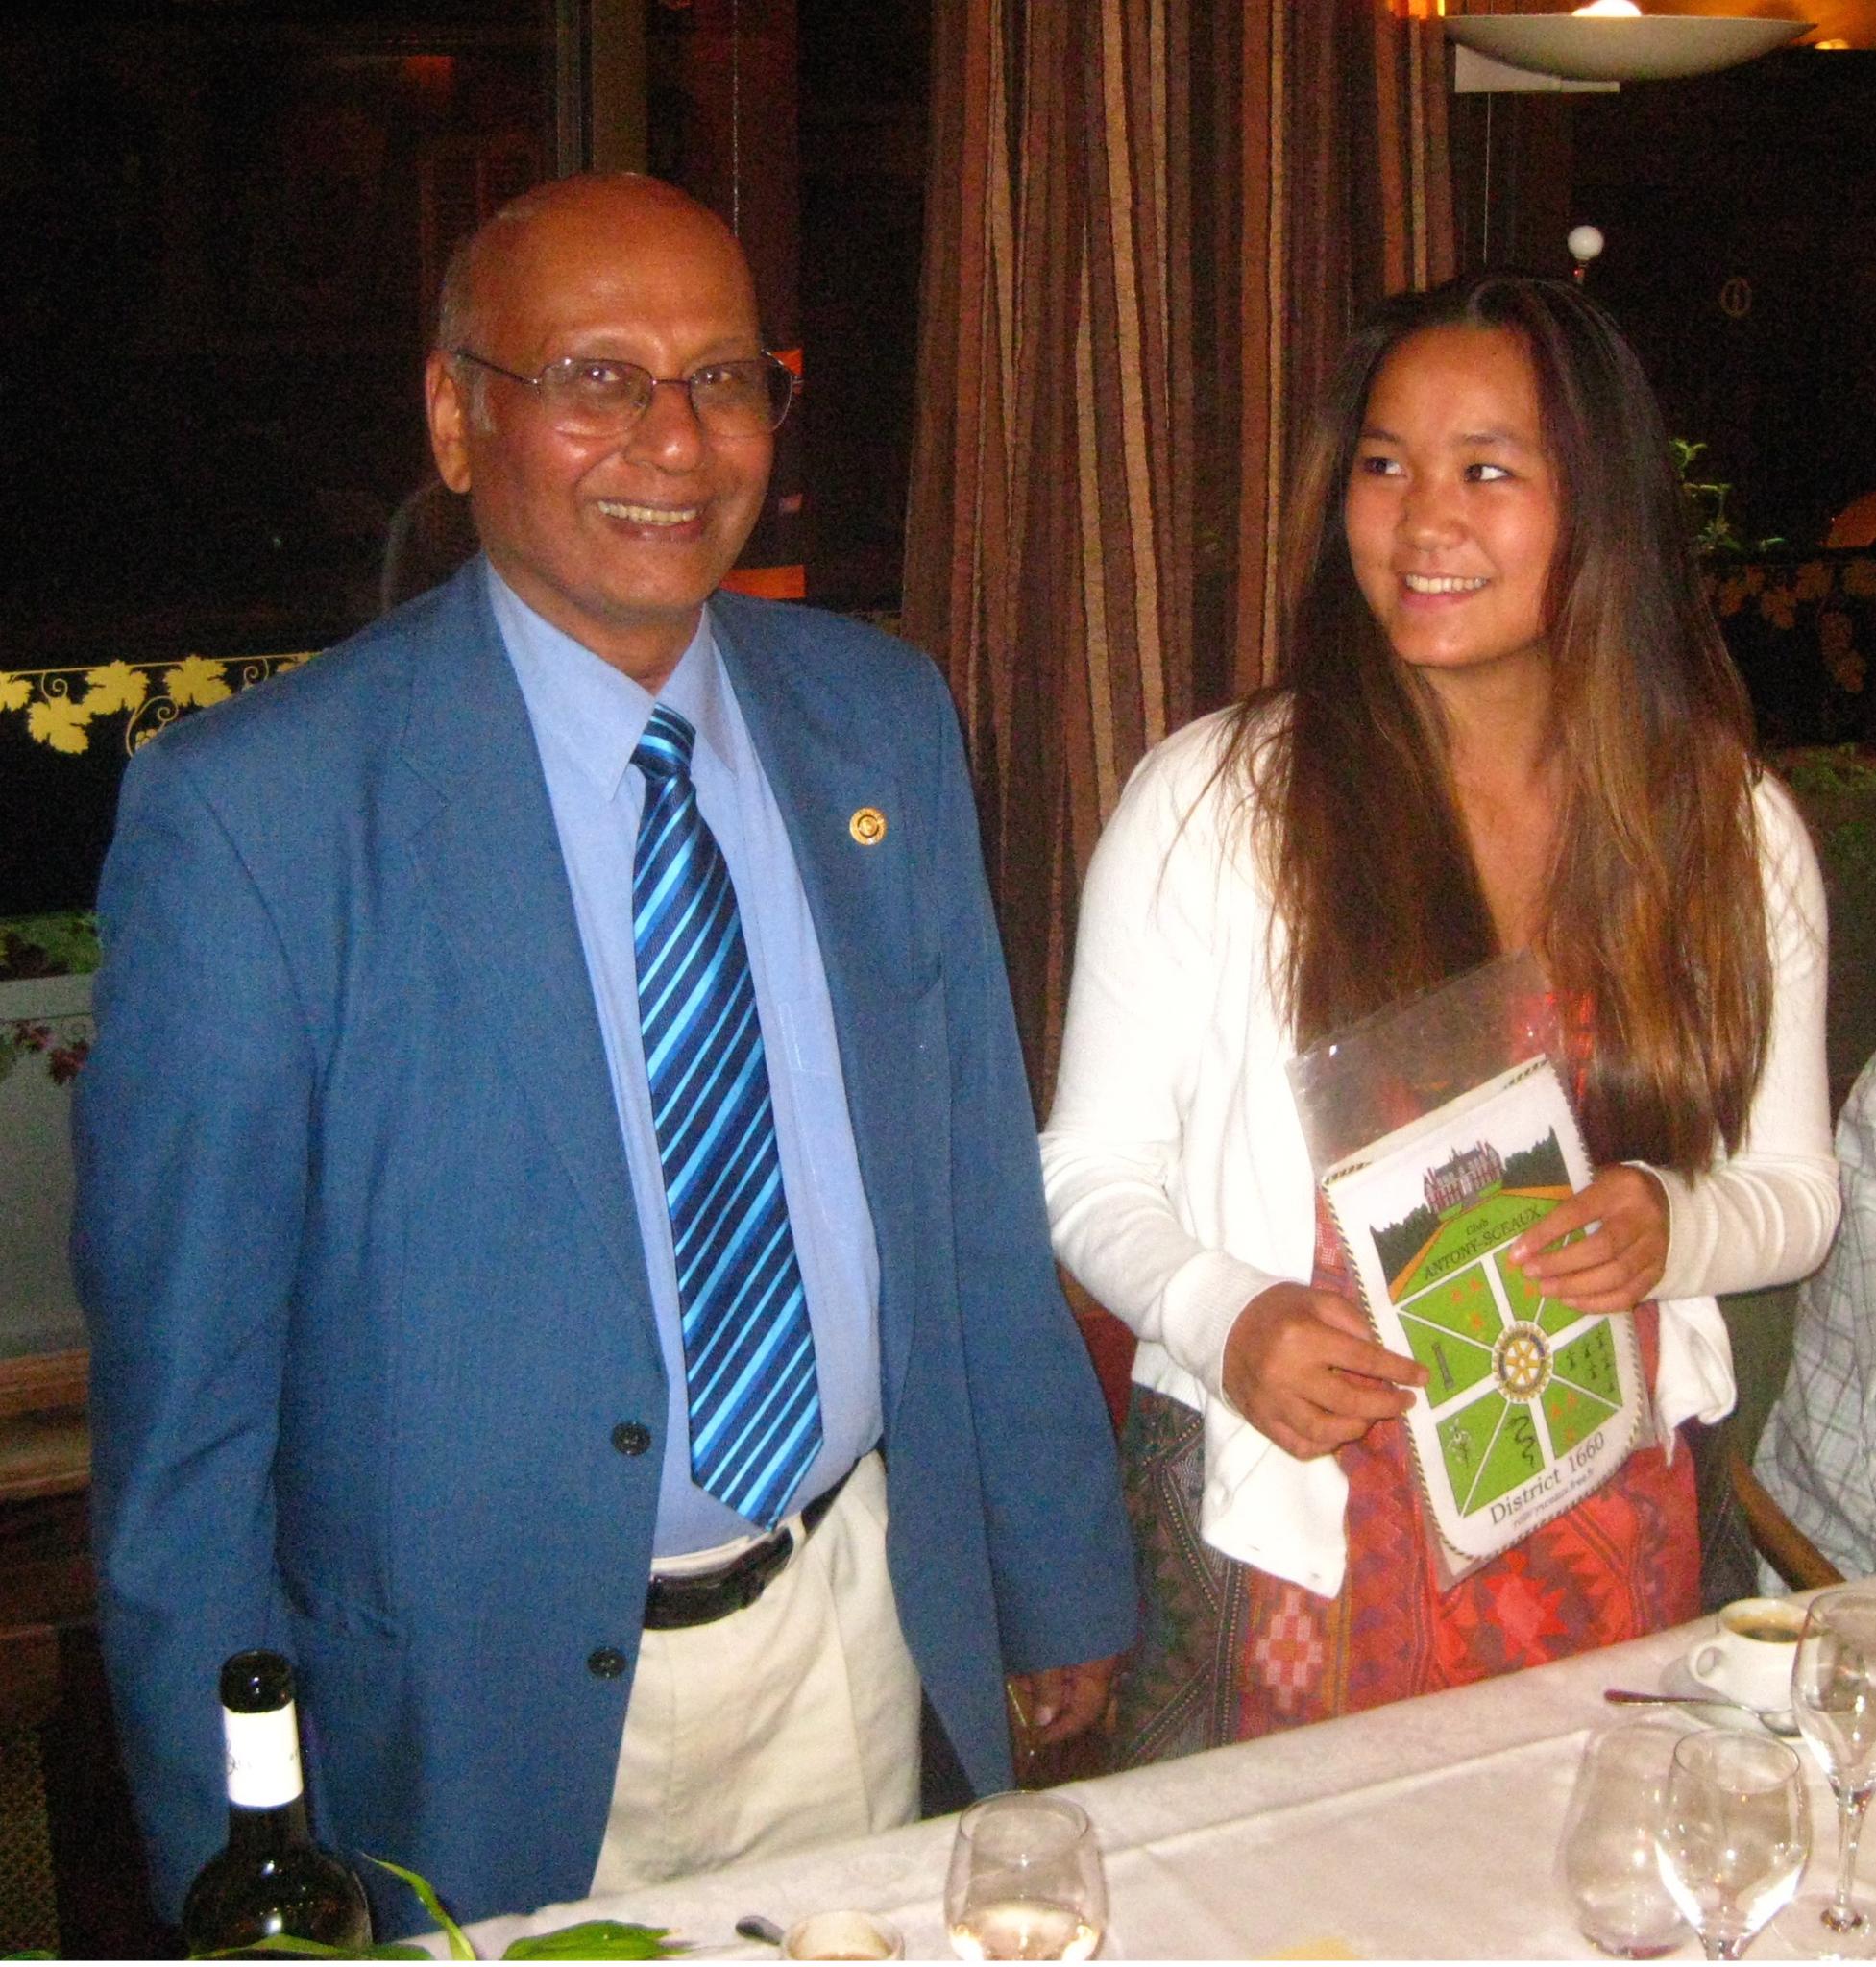 DM_ROTARY Student Exchange Dinner with Lillie  Yacine 1 19 08 2014 016